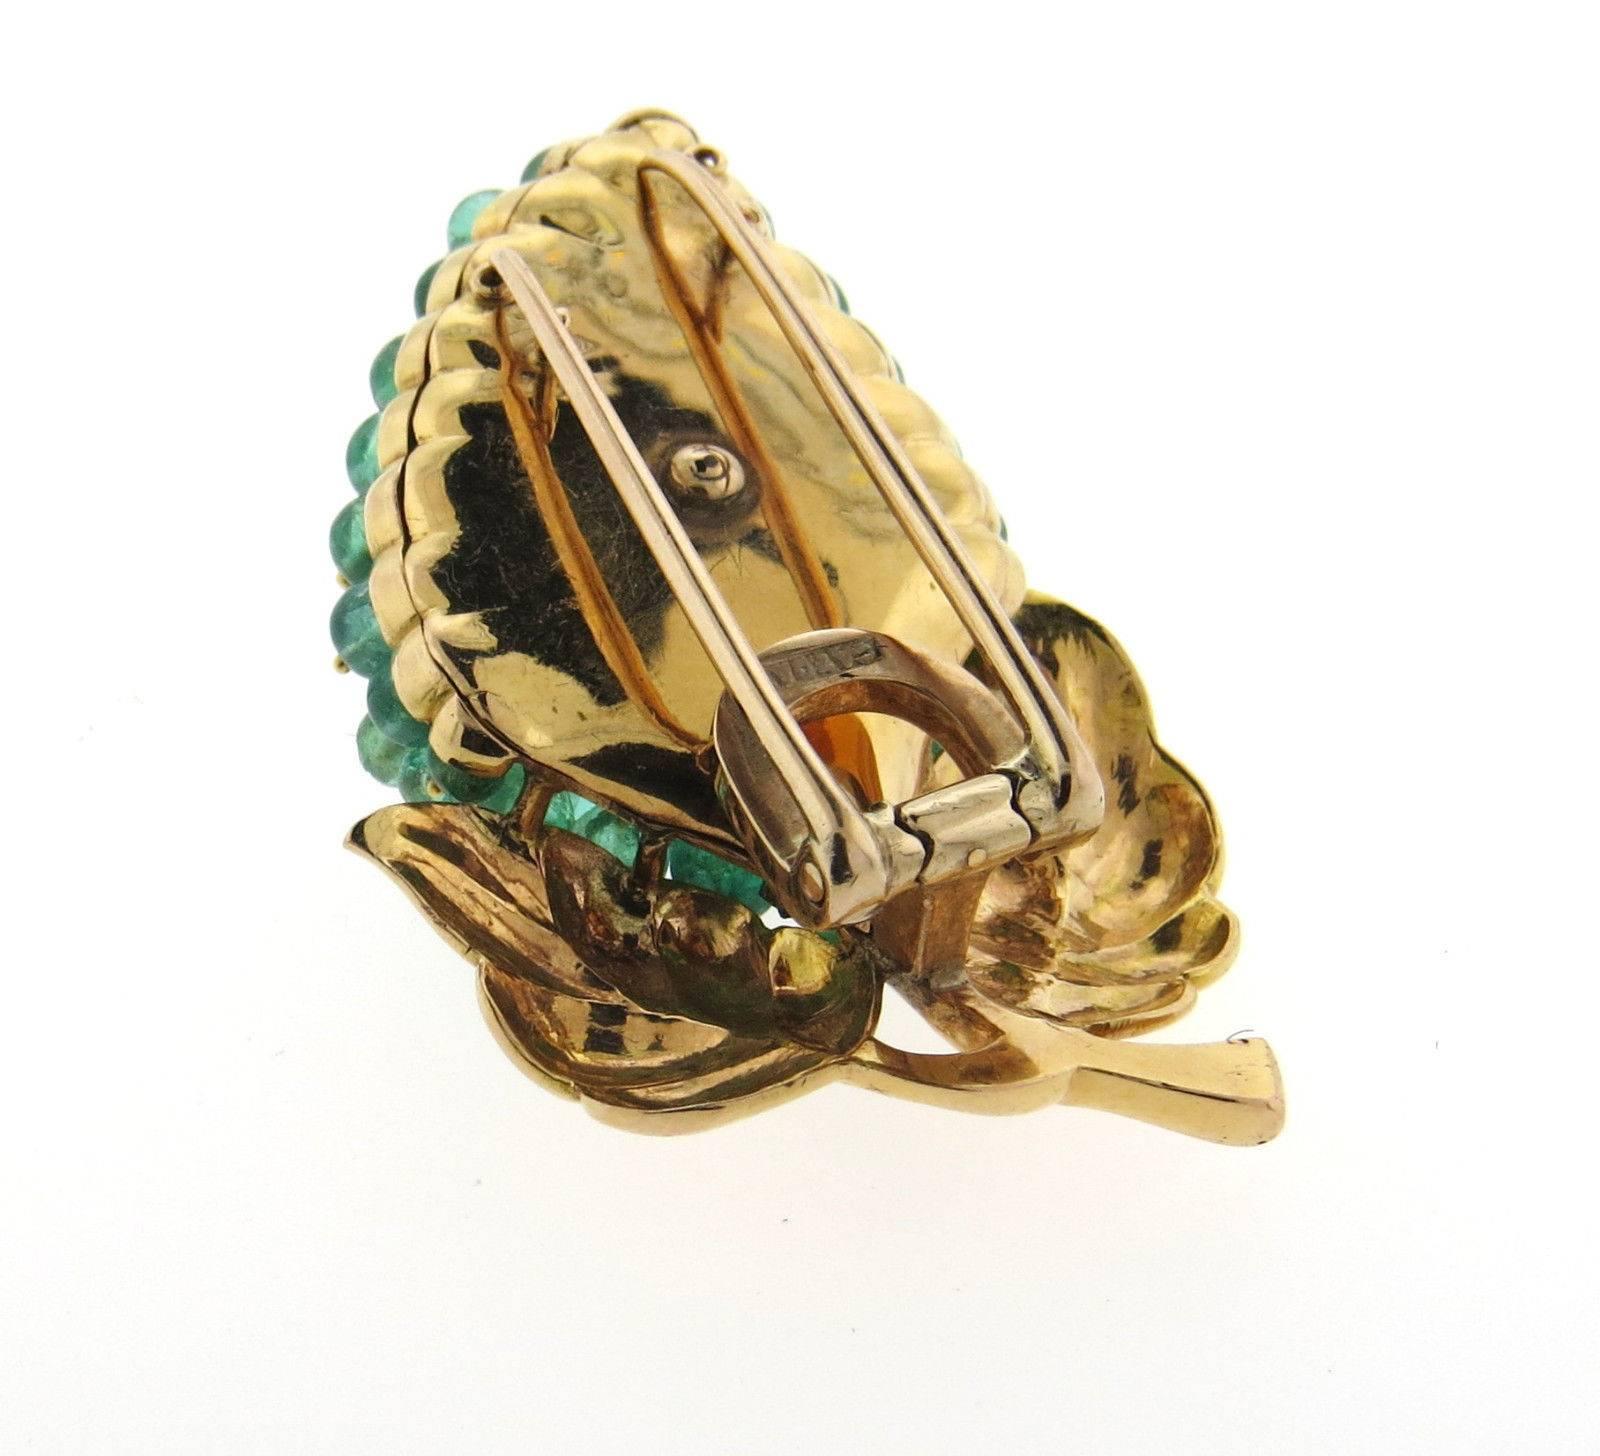 An 18k gold brooch set with emeralds and approximately 0.24ctw of G/VS diamonds. (*some emeralds have slight chips - visible upon close inspection*).  The brooch measures 54mm x 34mm  and weighs 26.4 grams. Marked: Gazdar 